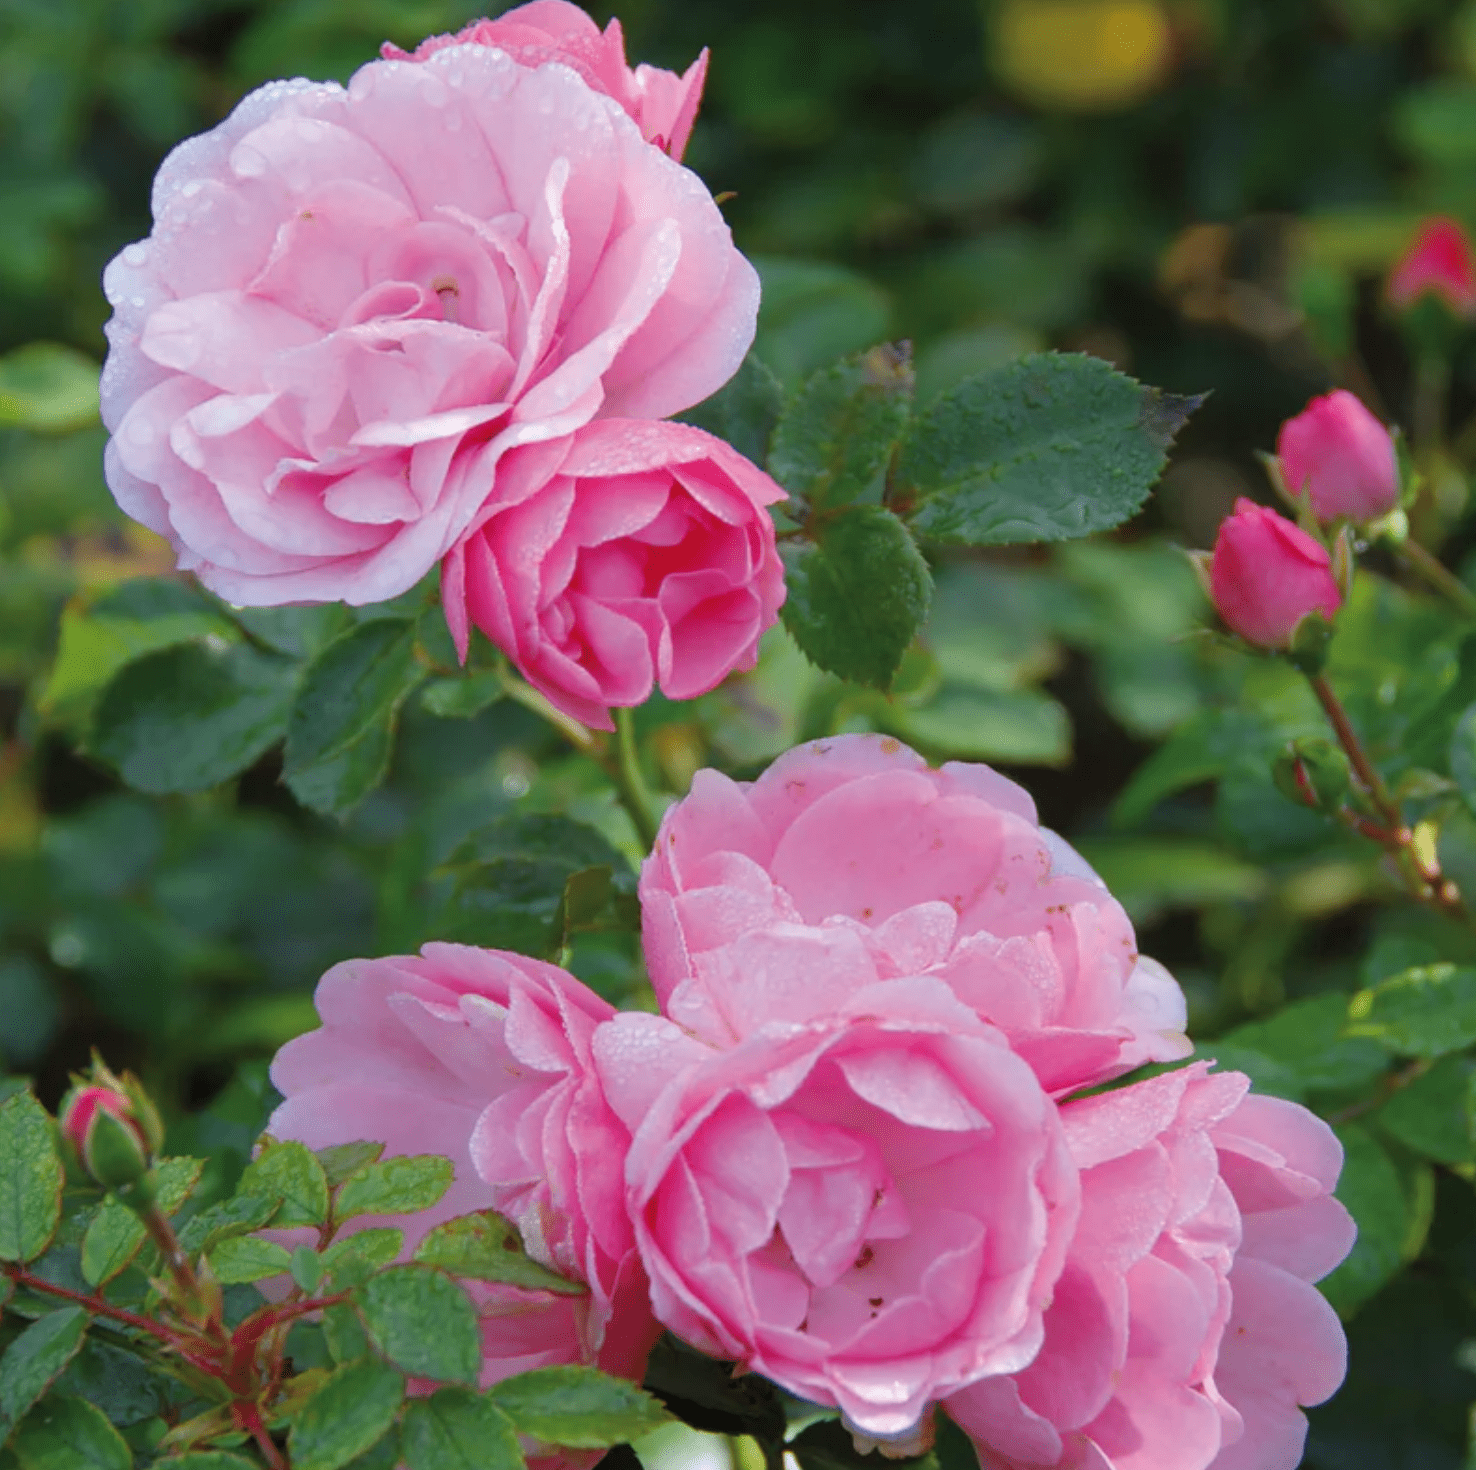 Top 10 Best Roses for Gardeners to Grow